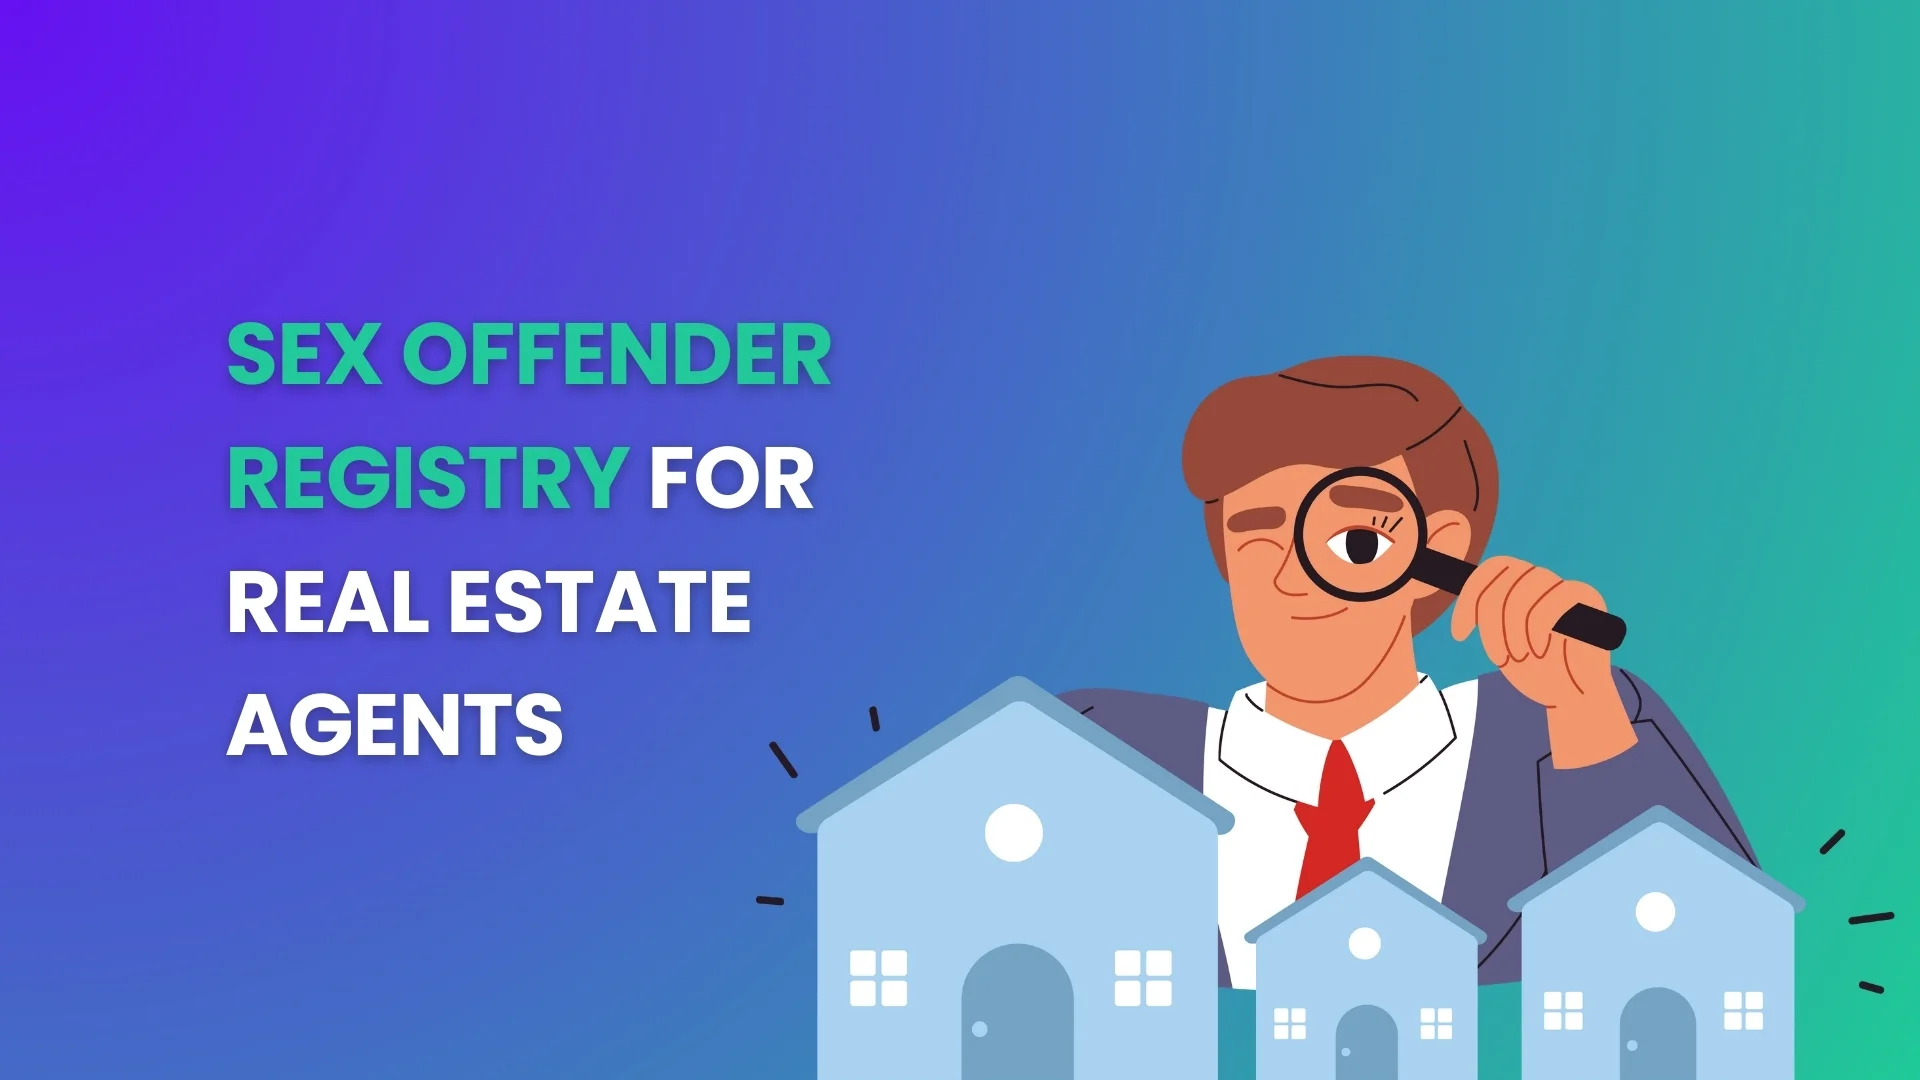 Sex offenders registry for real estate agents